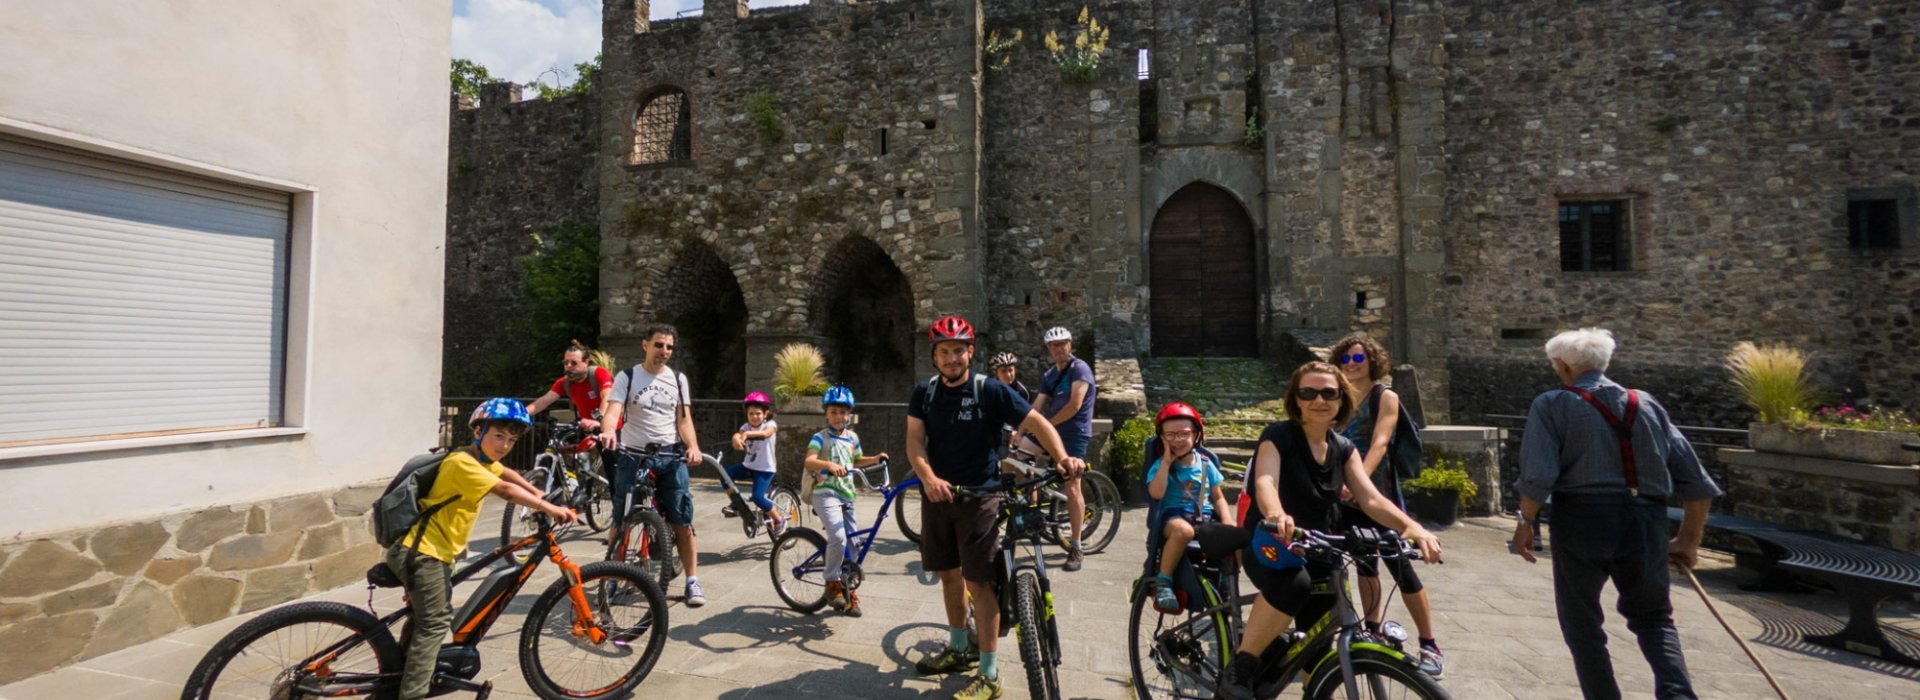 Bike tours in Lunigiana to discover villages, medieval castles and Apennine passes with beautiful views